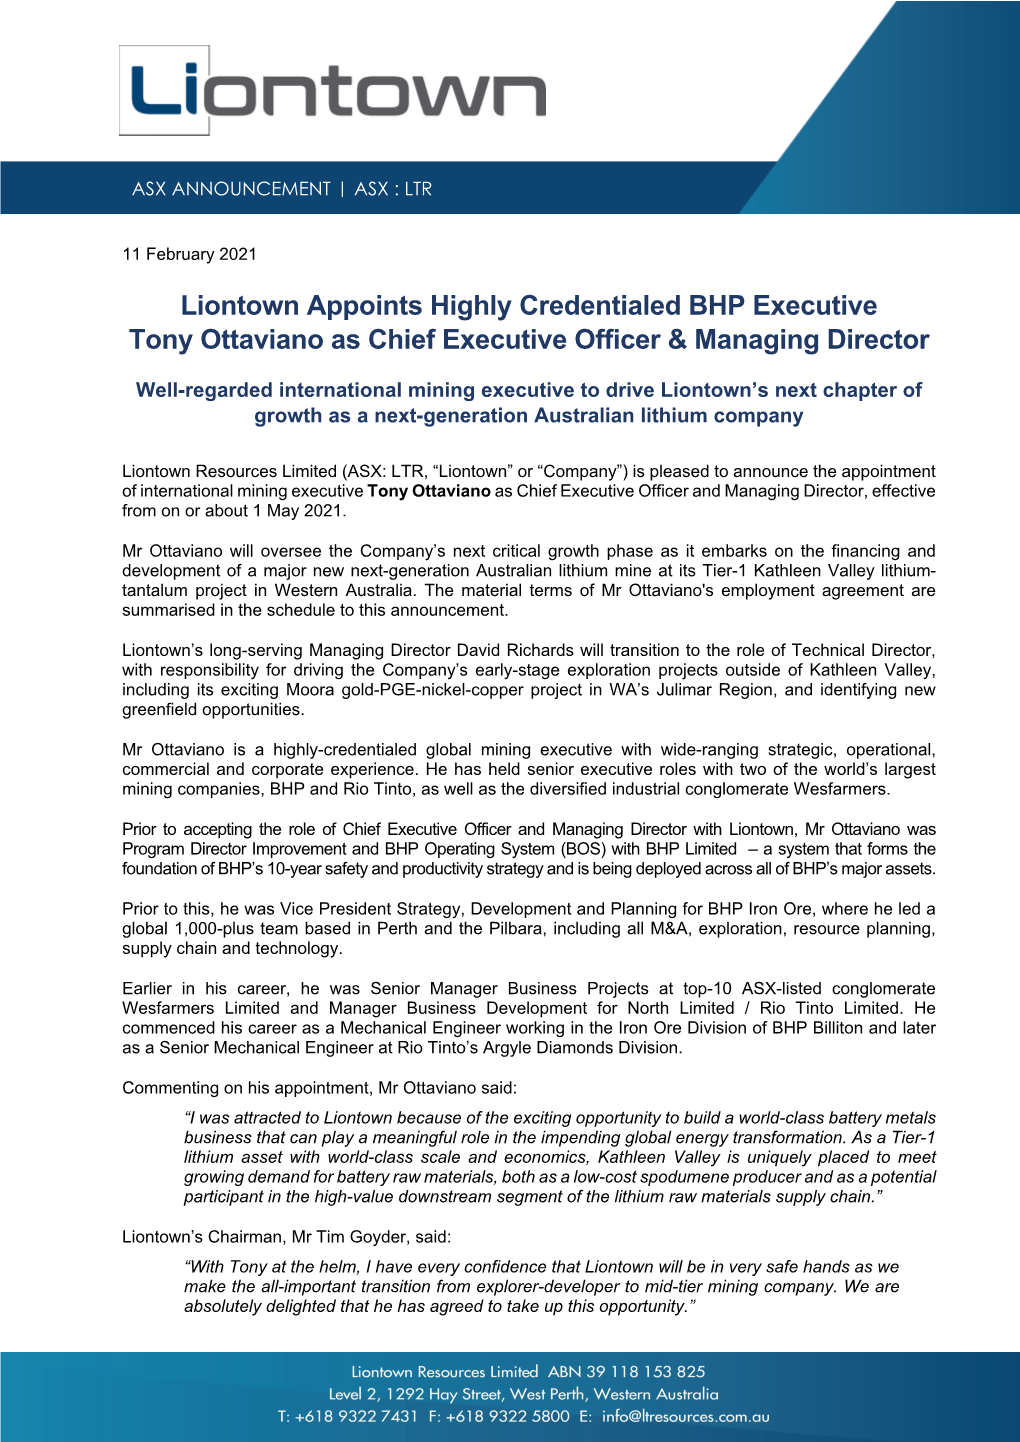 Kathleen Valley Confirmed As a World-Class Lithium Deposit As